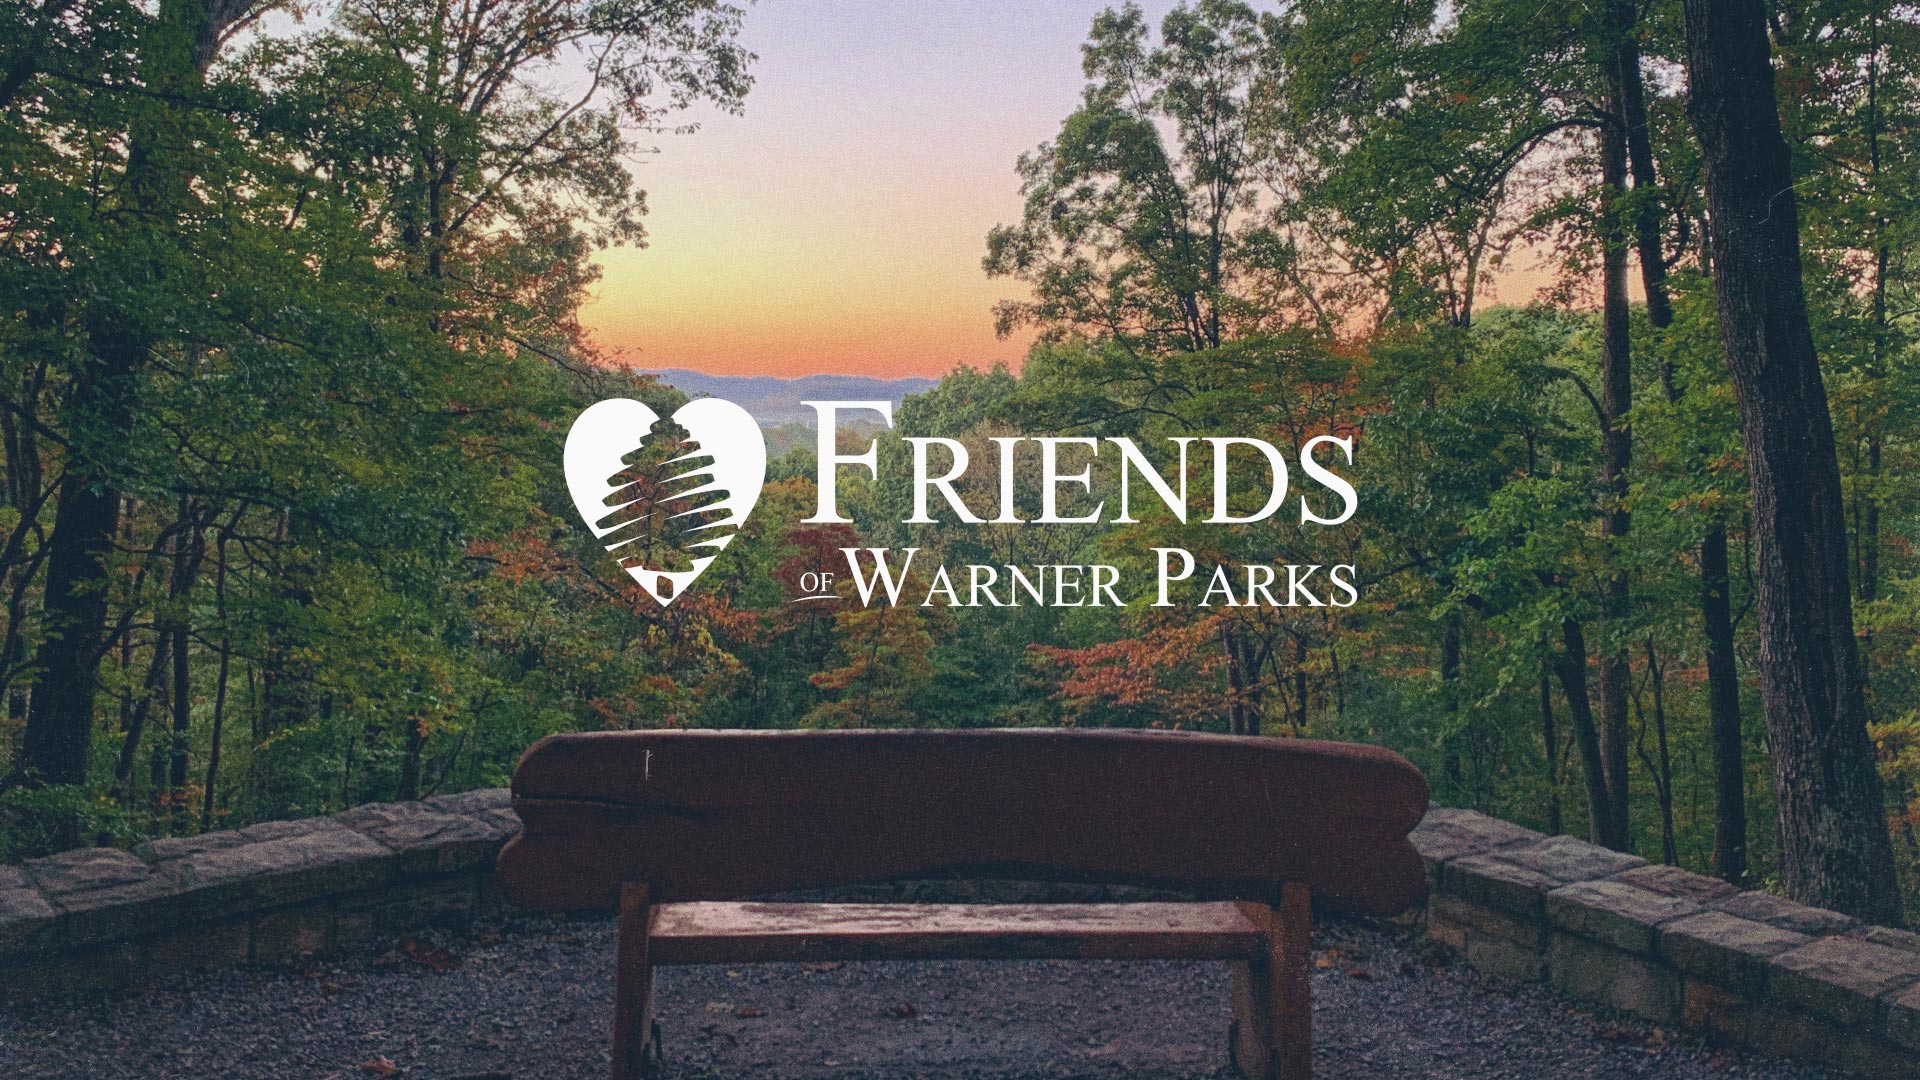 Park bench overlooking Warner Park with the Friends of Warner Parks logo overlaying the image.